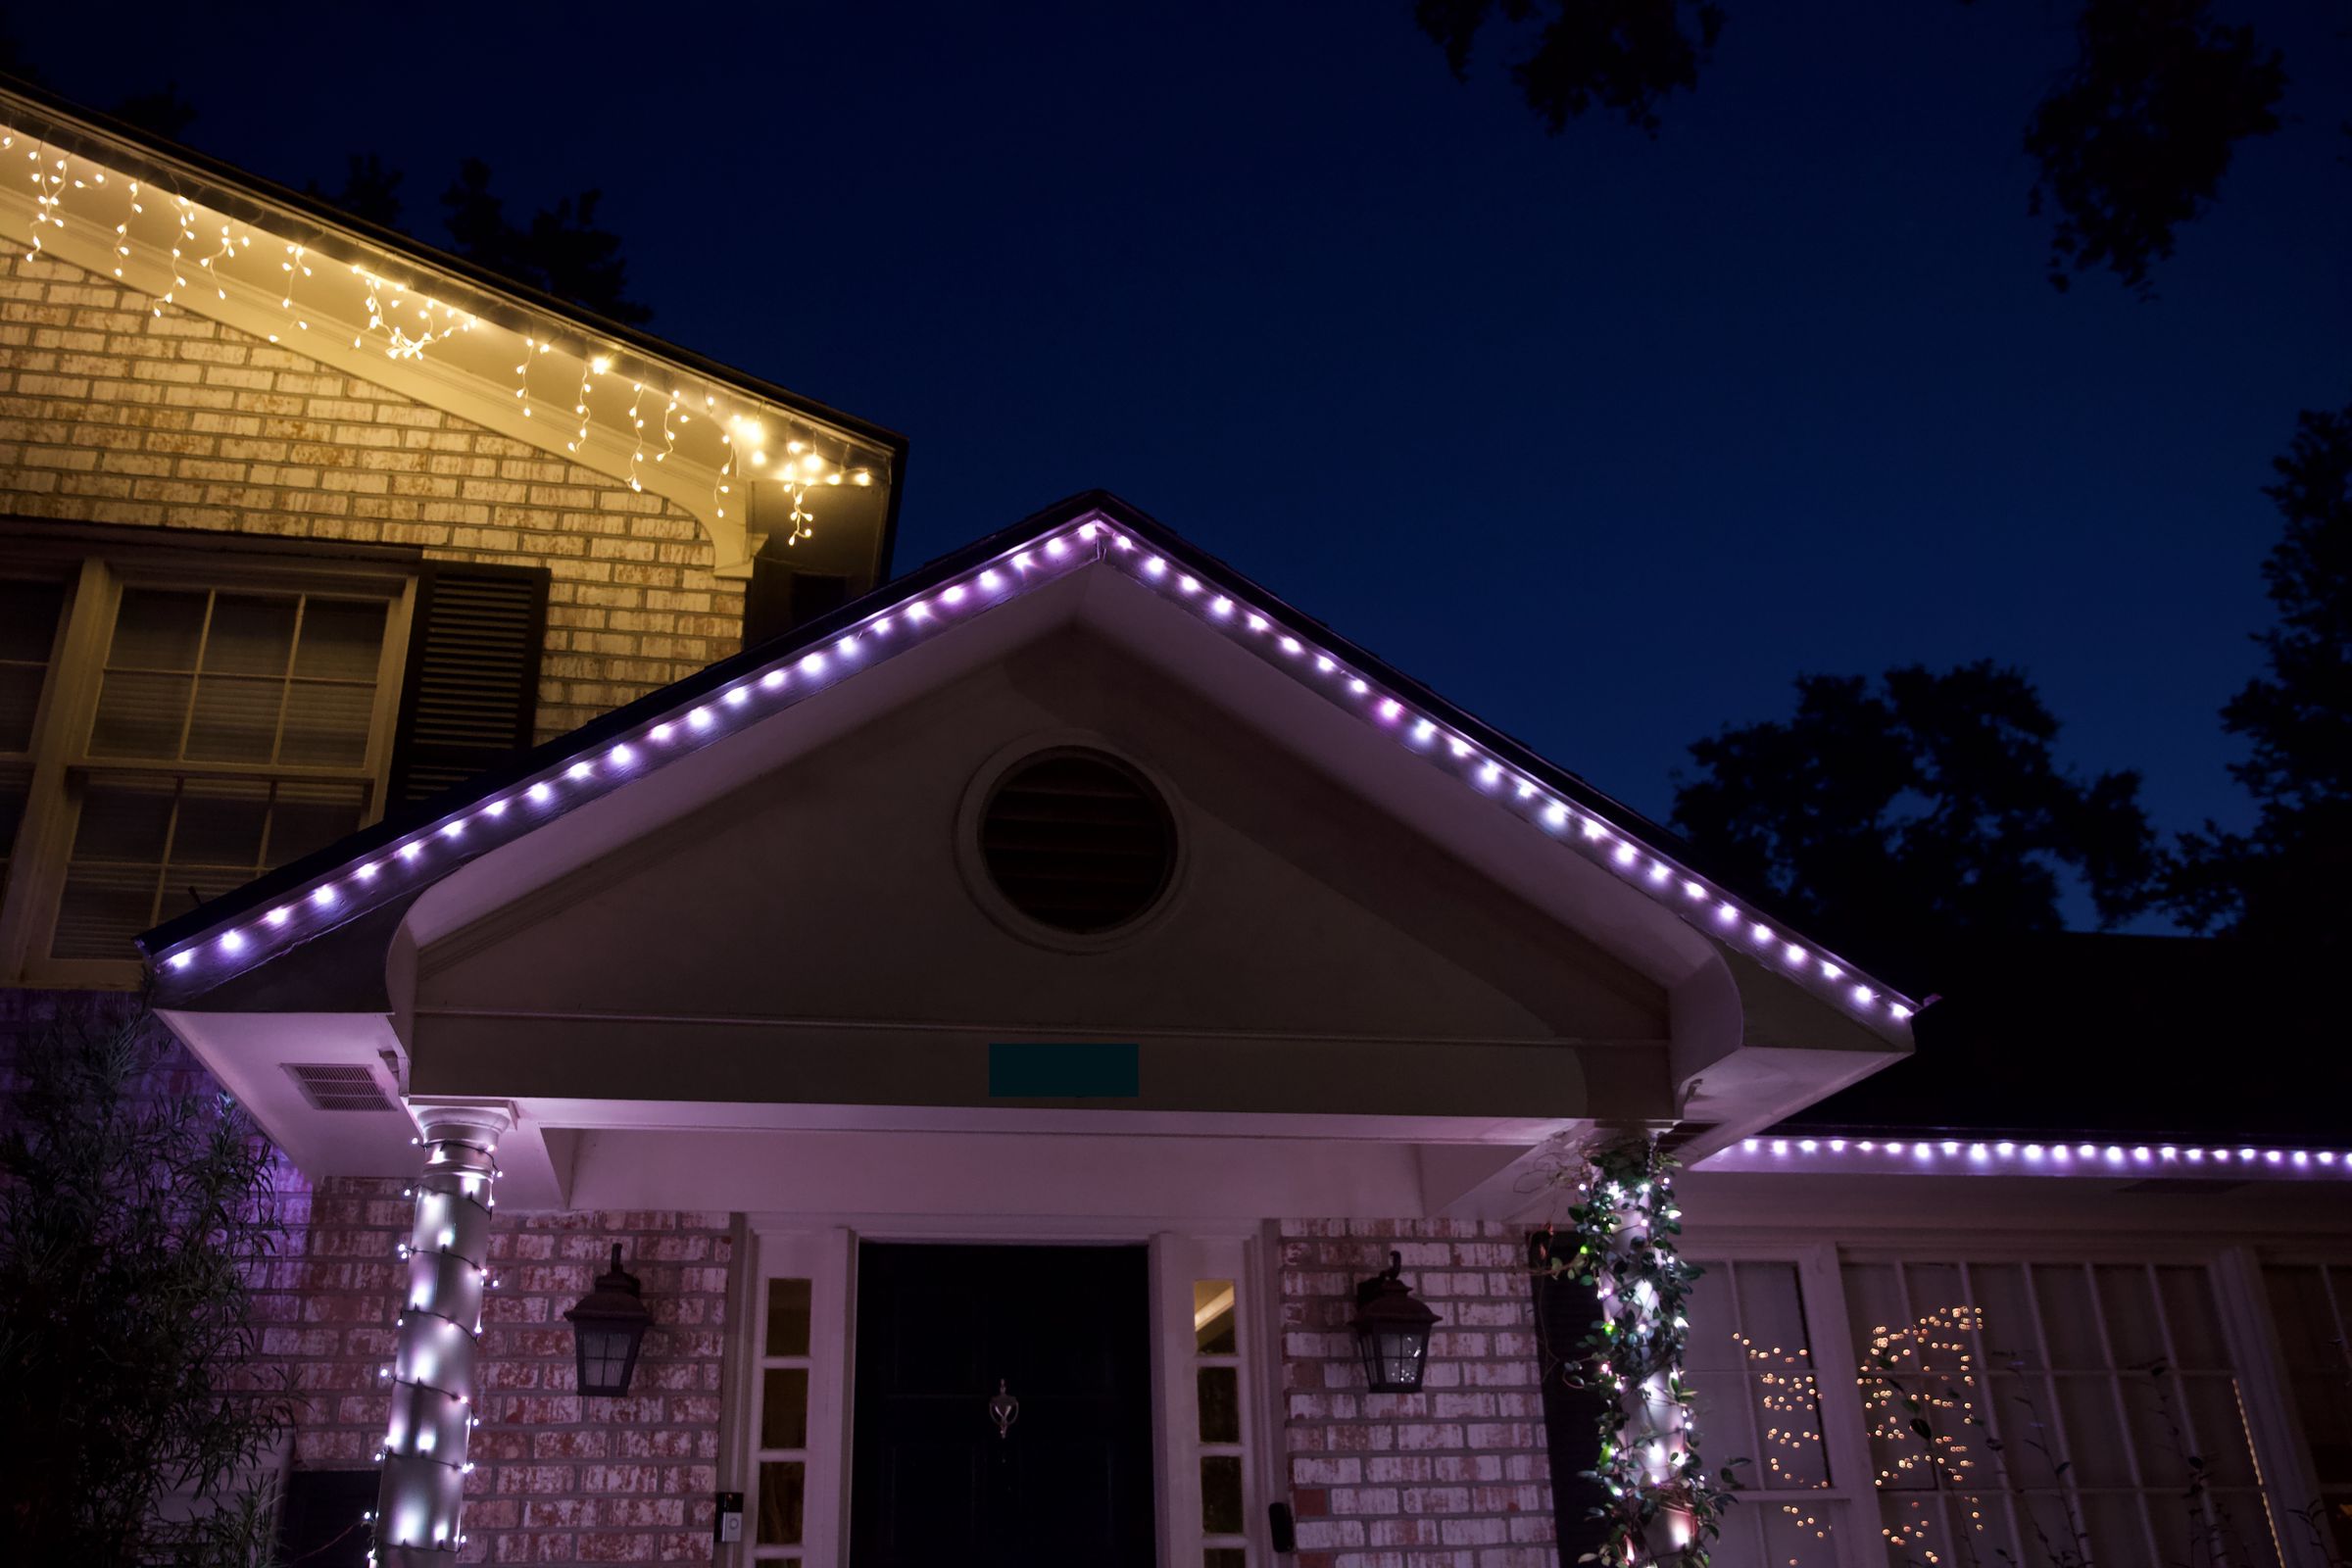 The Govee lights on the porch peak and the roofline to the right are drop heads. They have a flatter, wider look than traditional bullet-head string lights like the Twinkly strands on the columns.